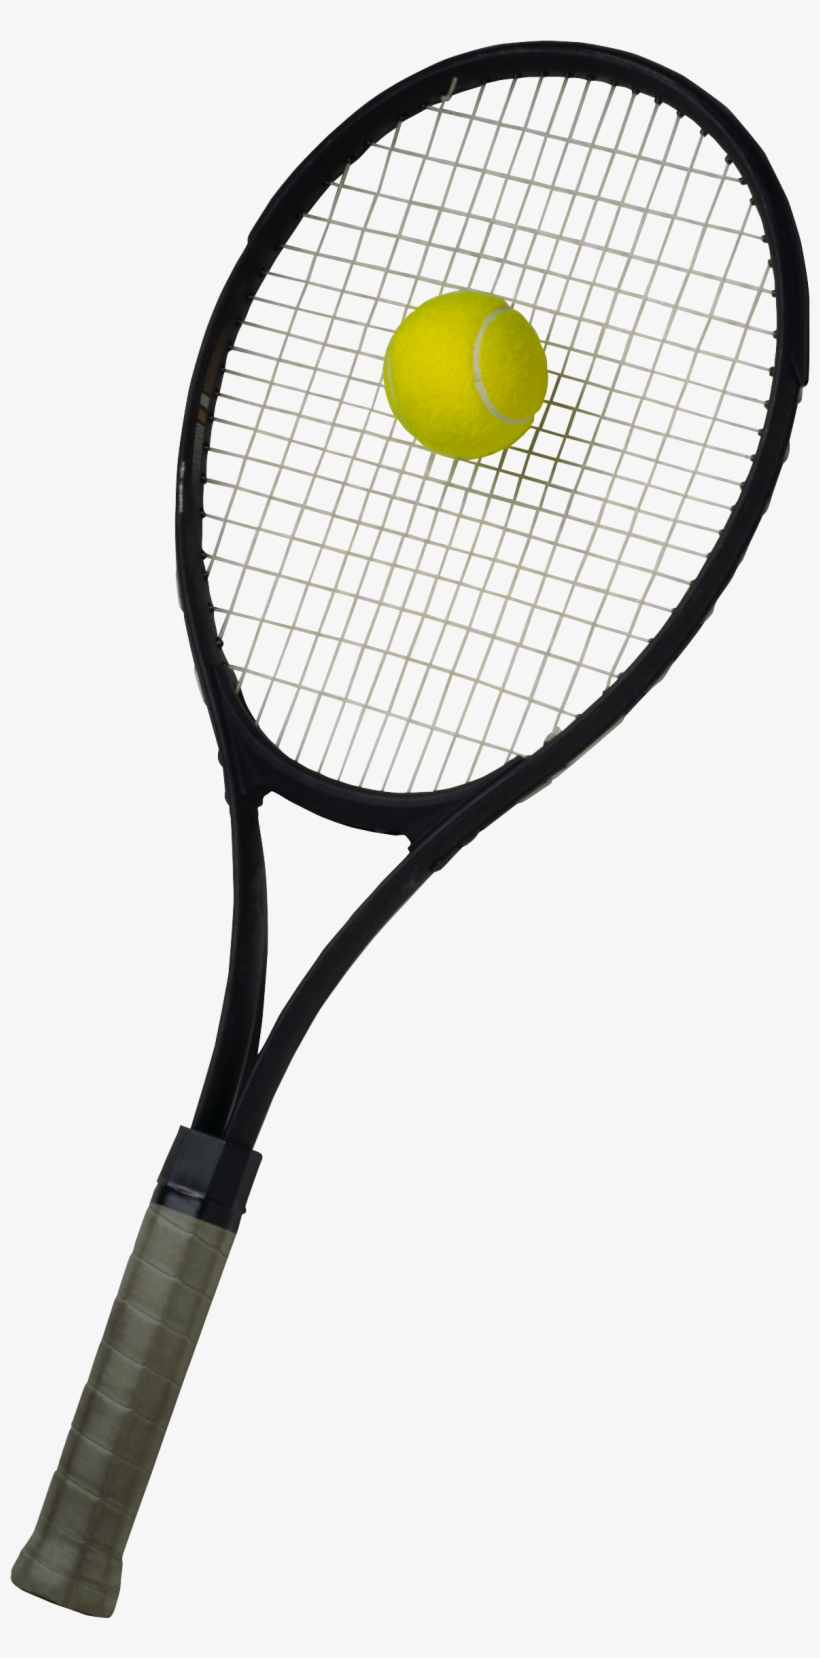 Tennis Is A Racket Sport That Can Be Played Individually - Tennis Ball And Racket Png, transparent png #738660